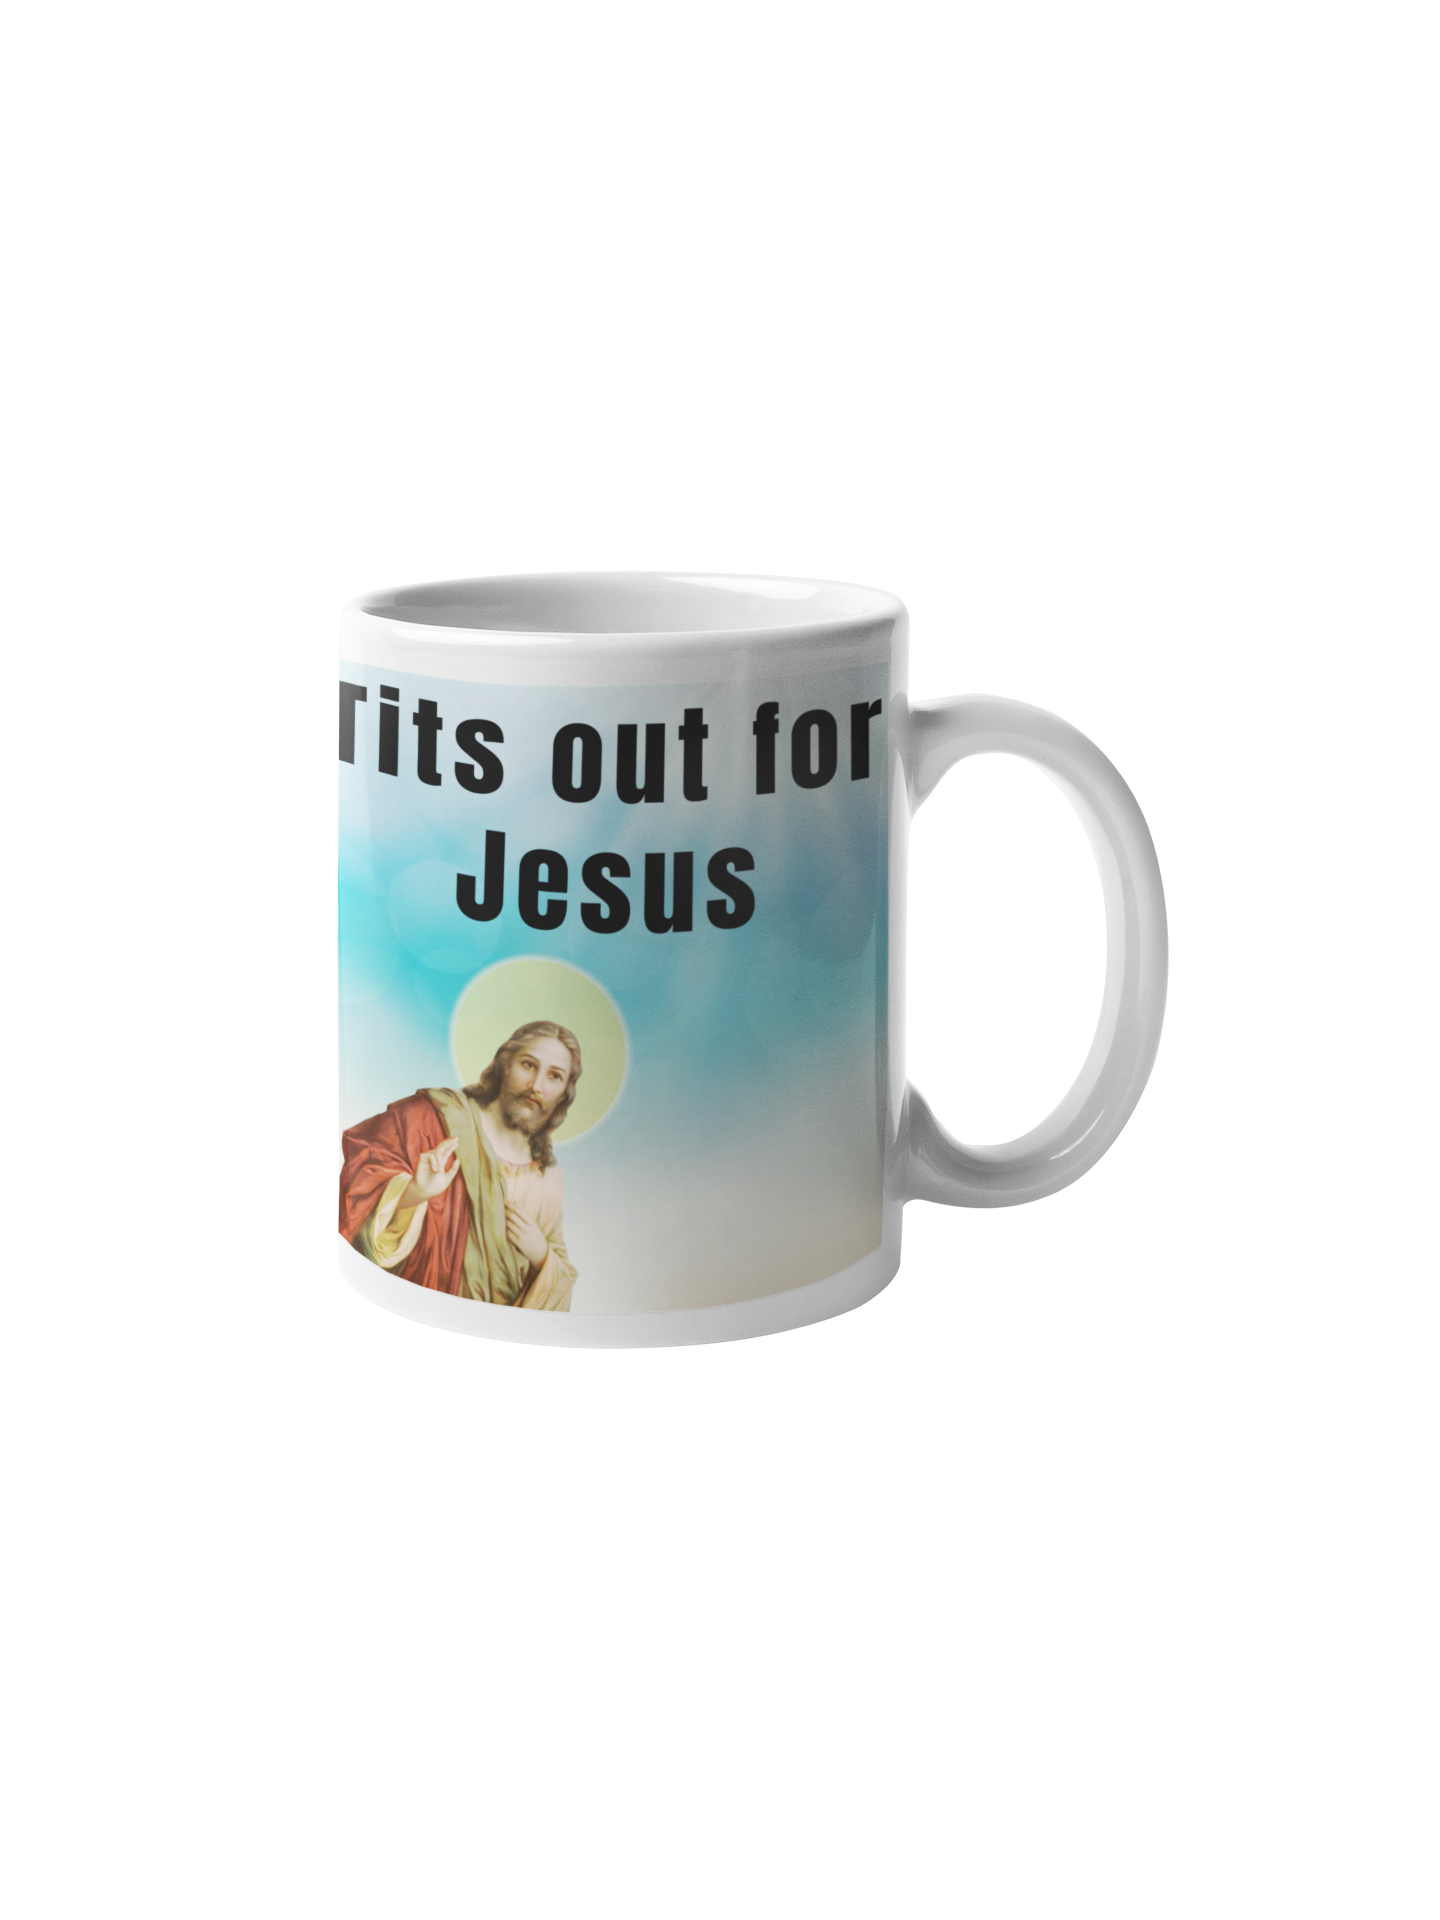 Tits out for Jesus - White glossy mug